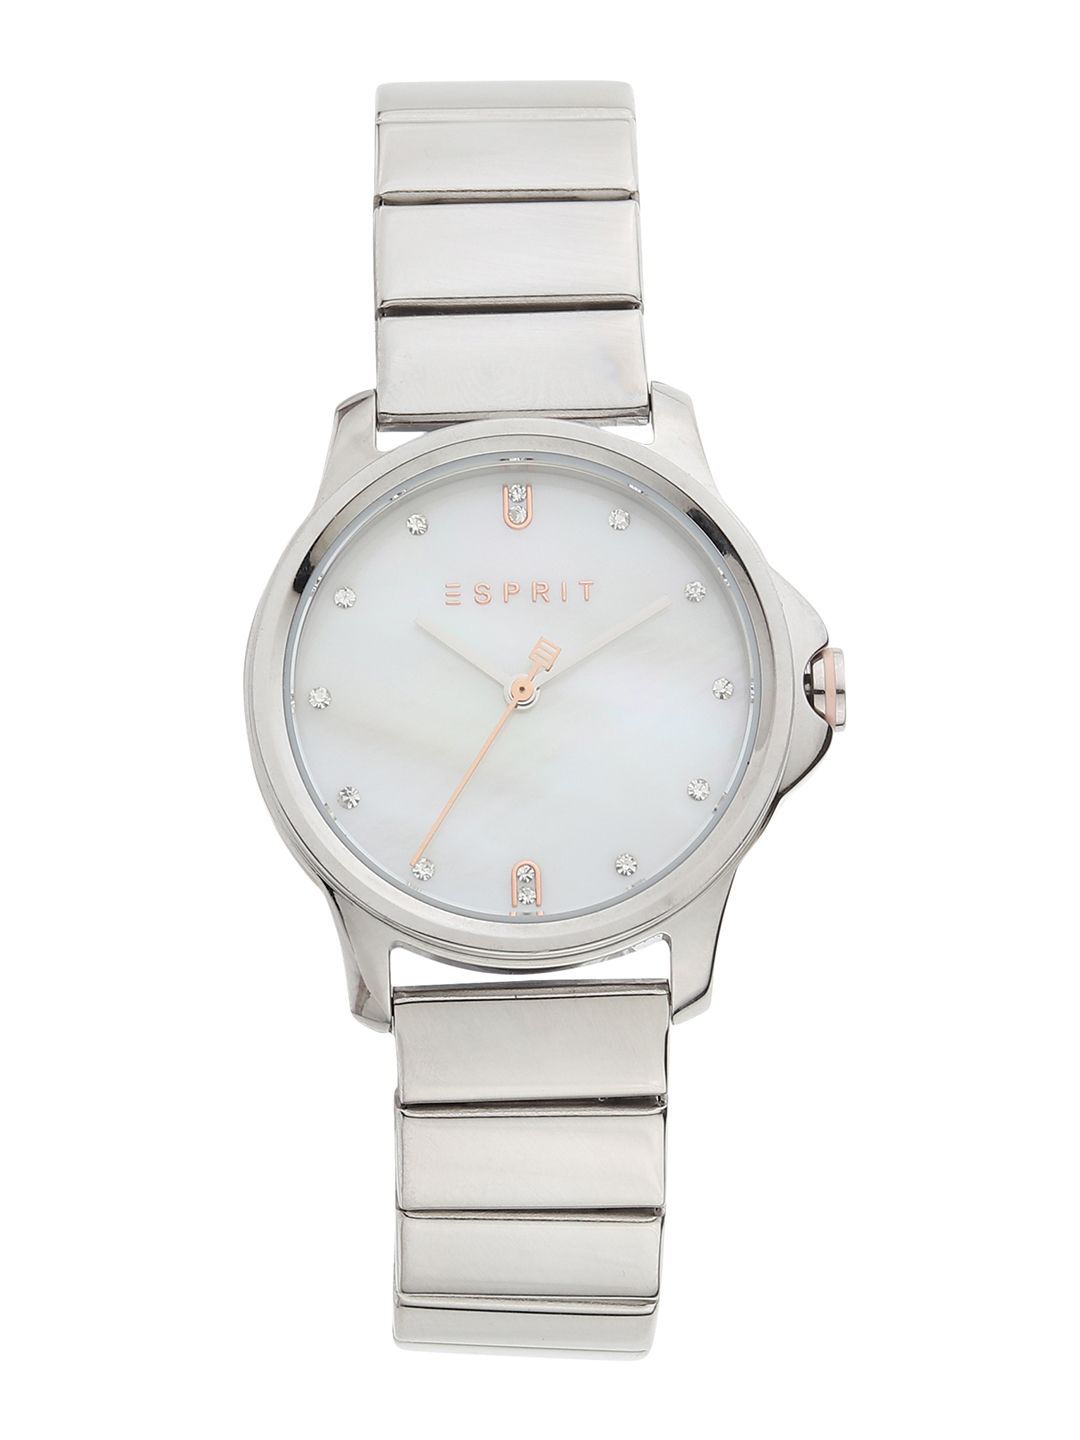 ESPRIT Women Silver-Toned Analogue Watch ES1L142M1045 Price in India